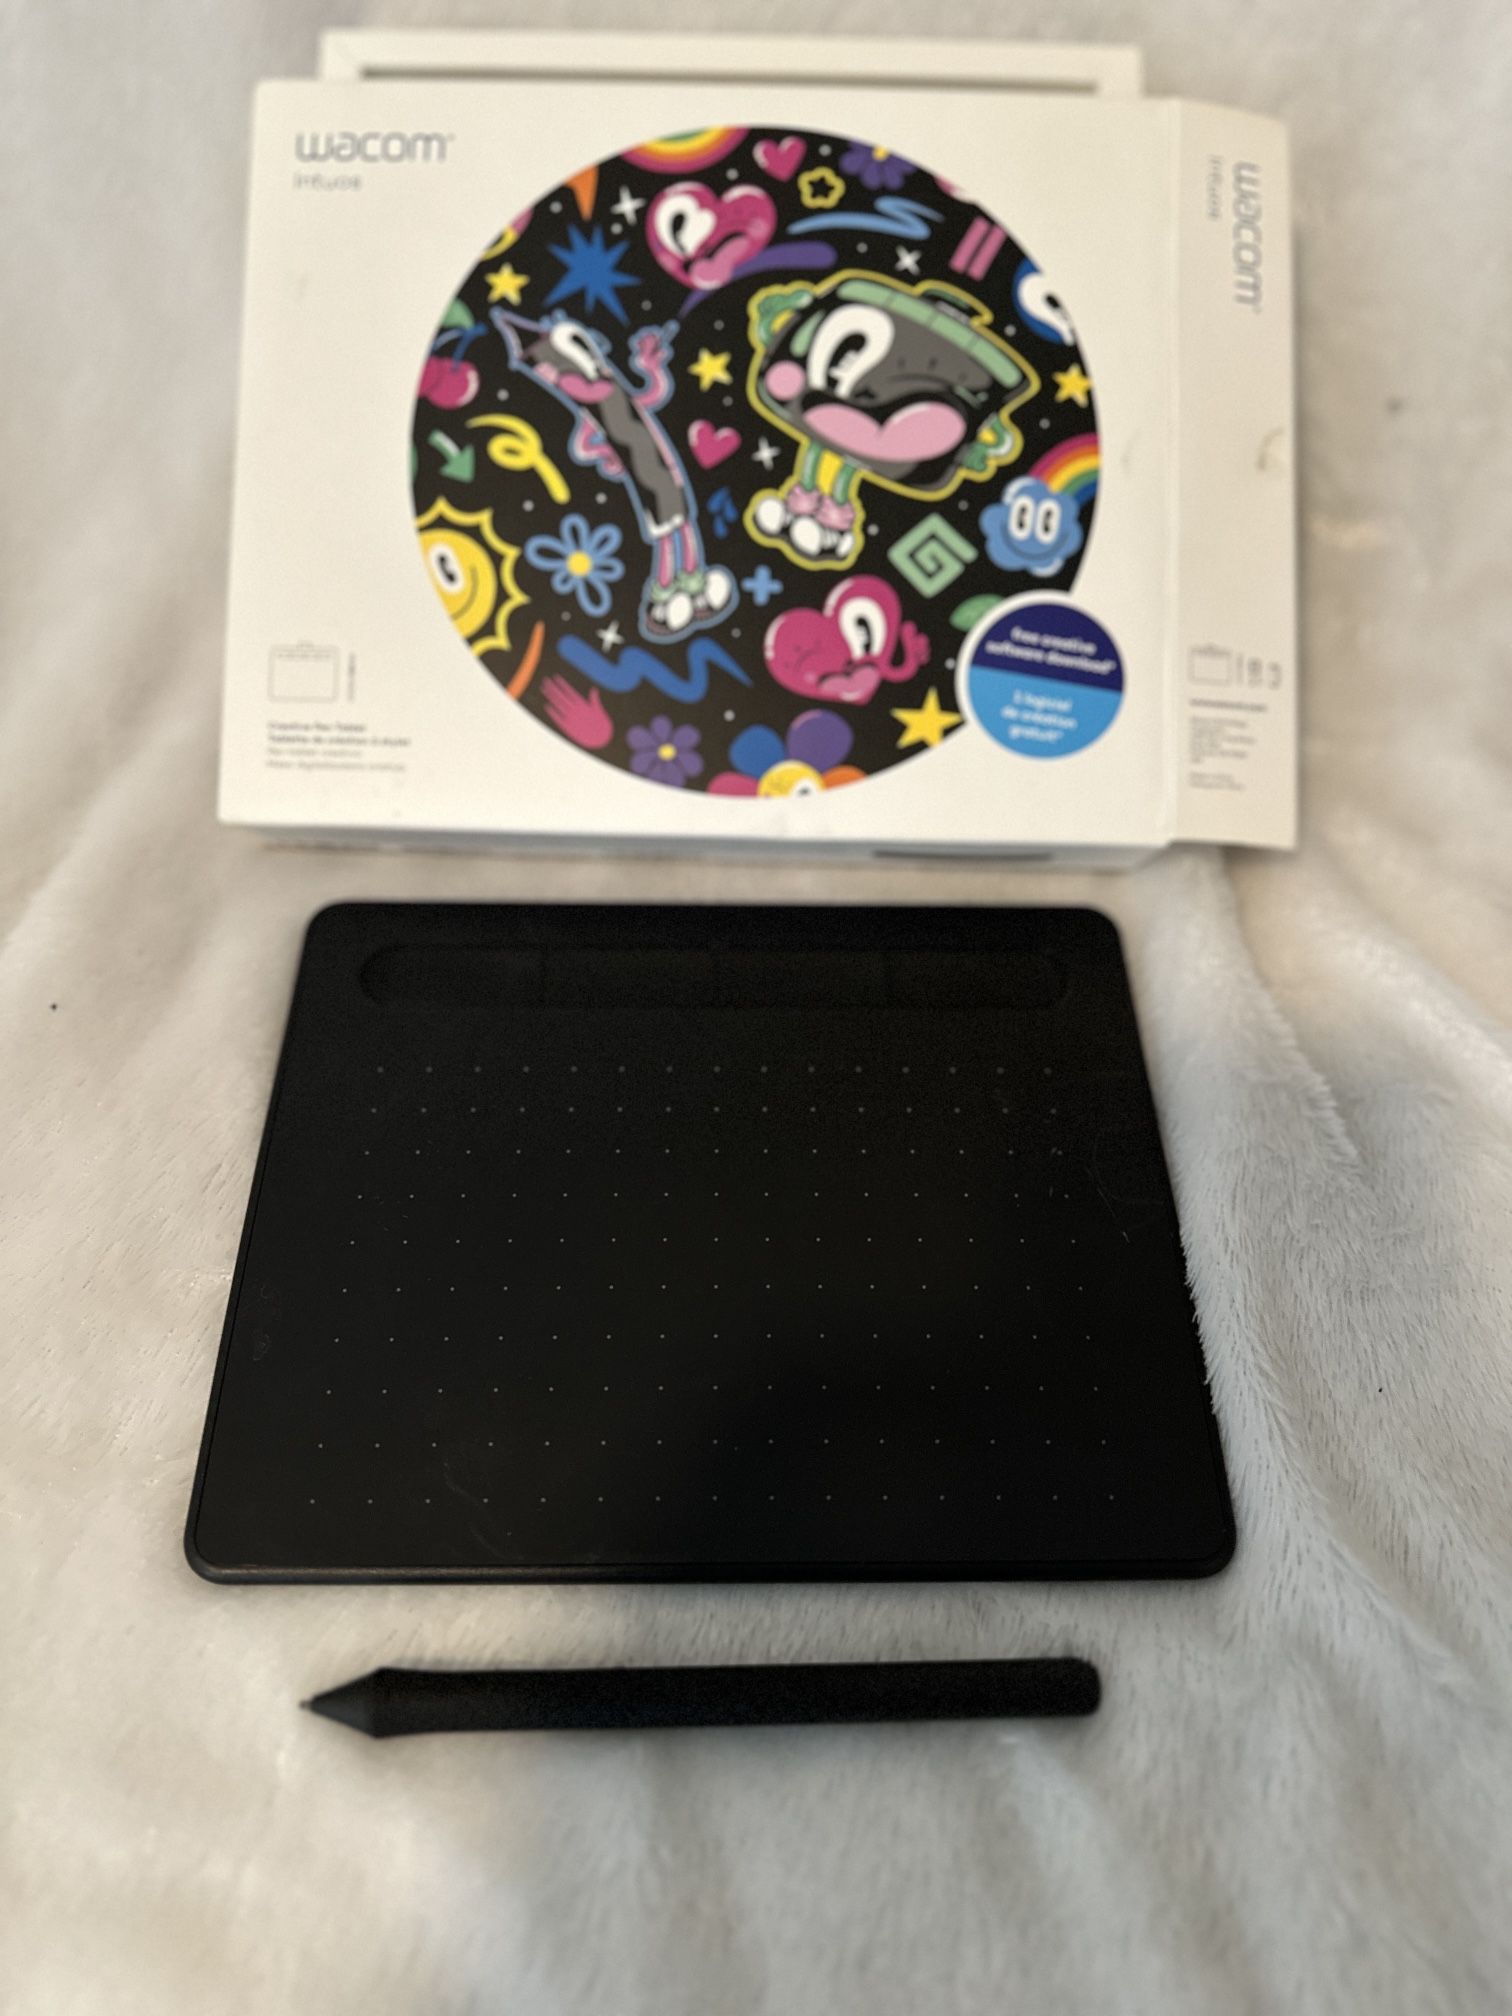 Wacom - Intuos Graphic Drawing Tablet for Mac, PC, Chromebook & Android (Small) with Software Included - Black